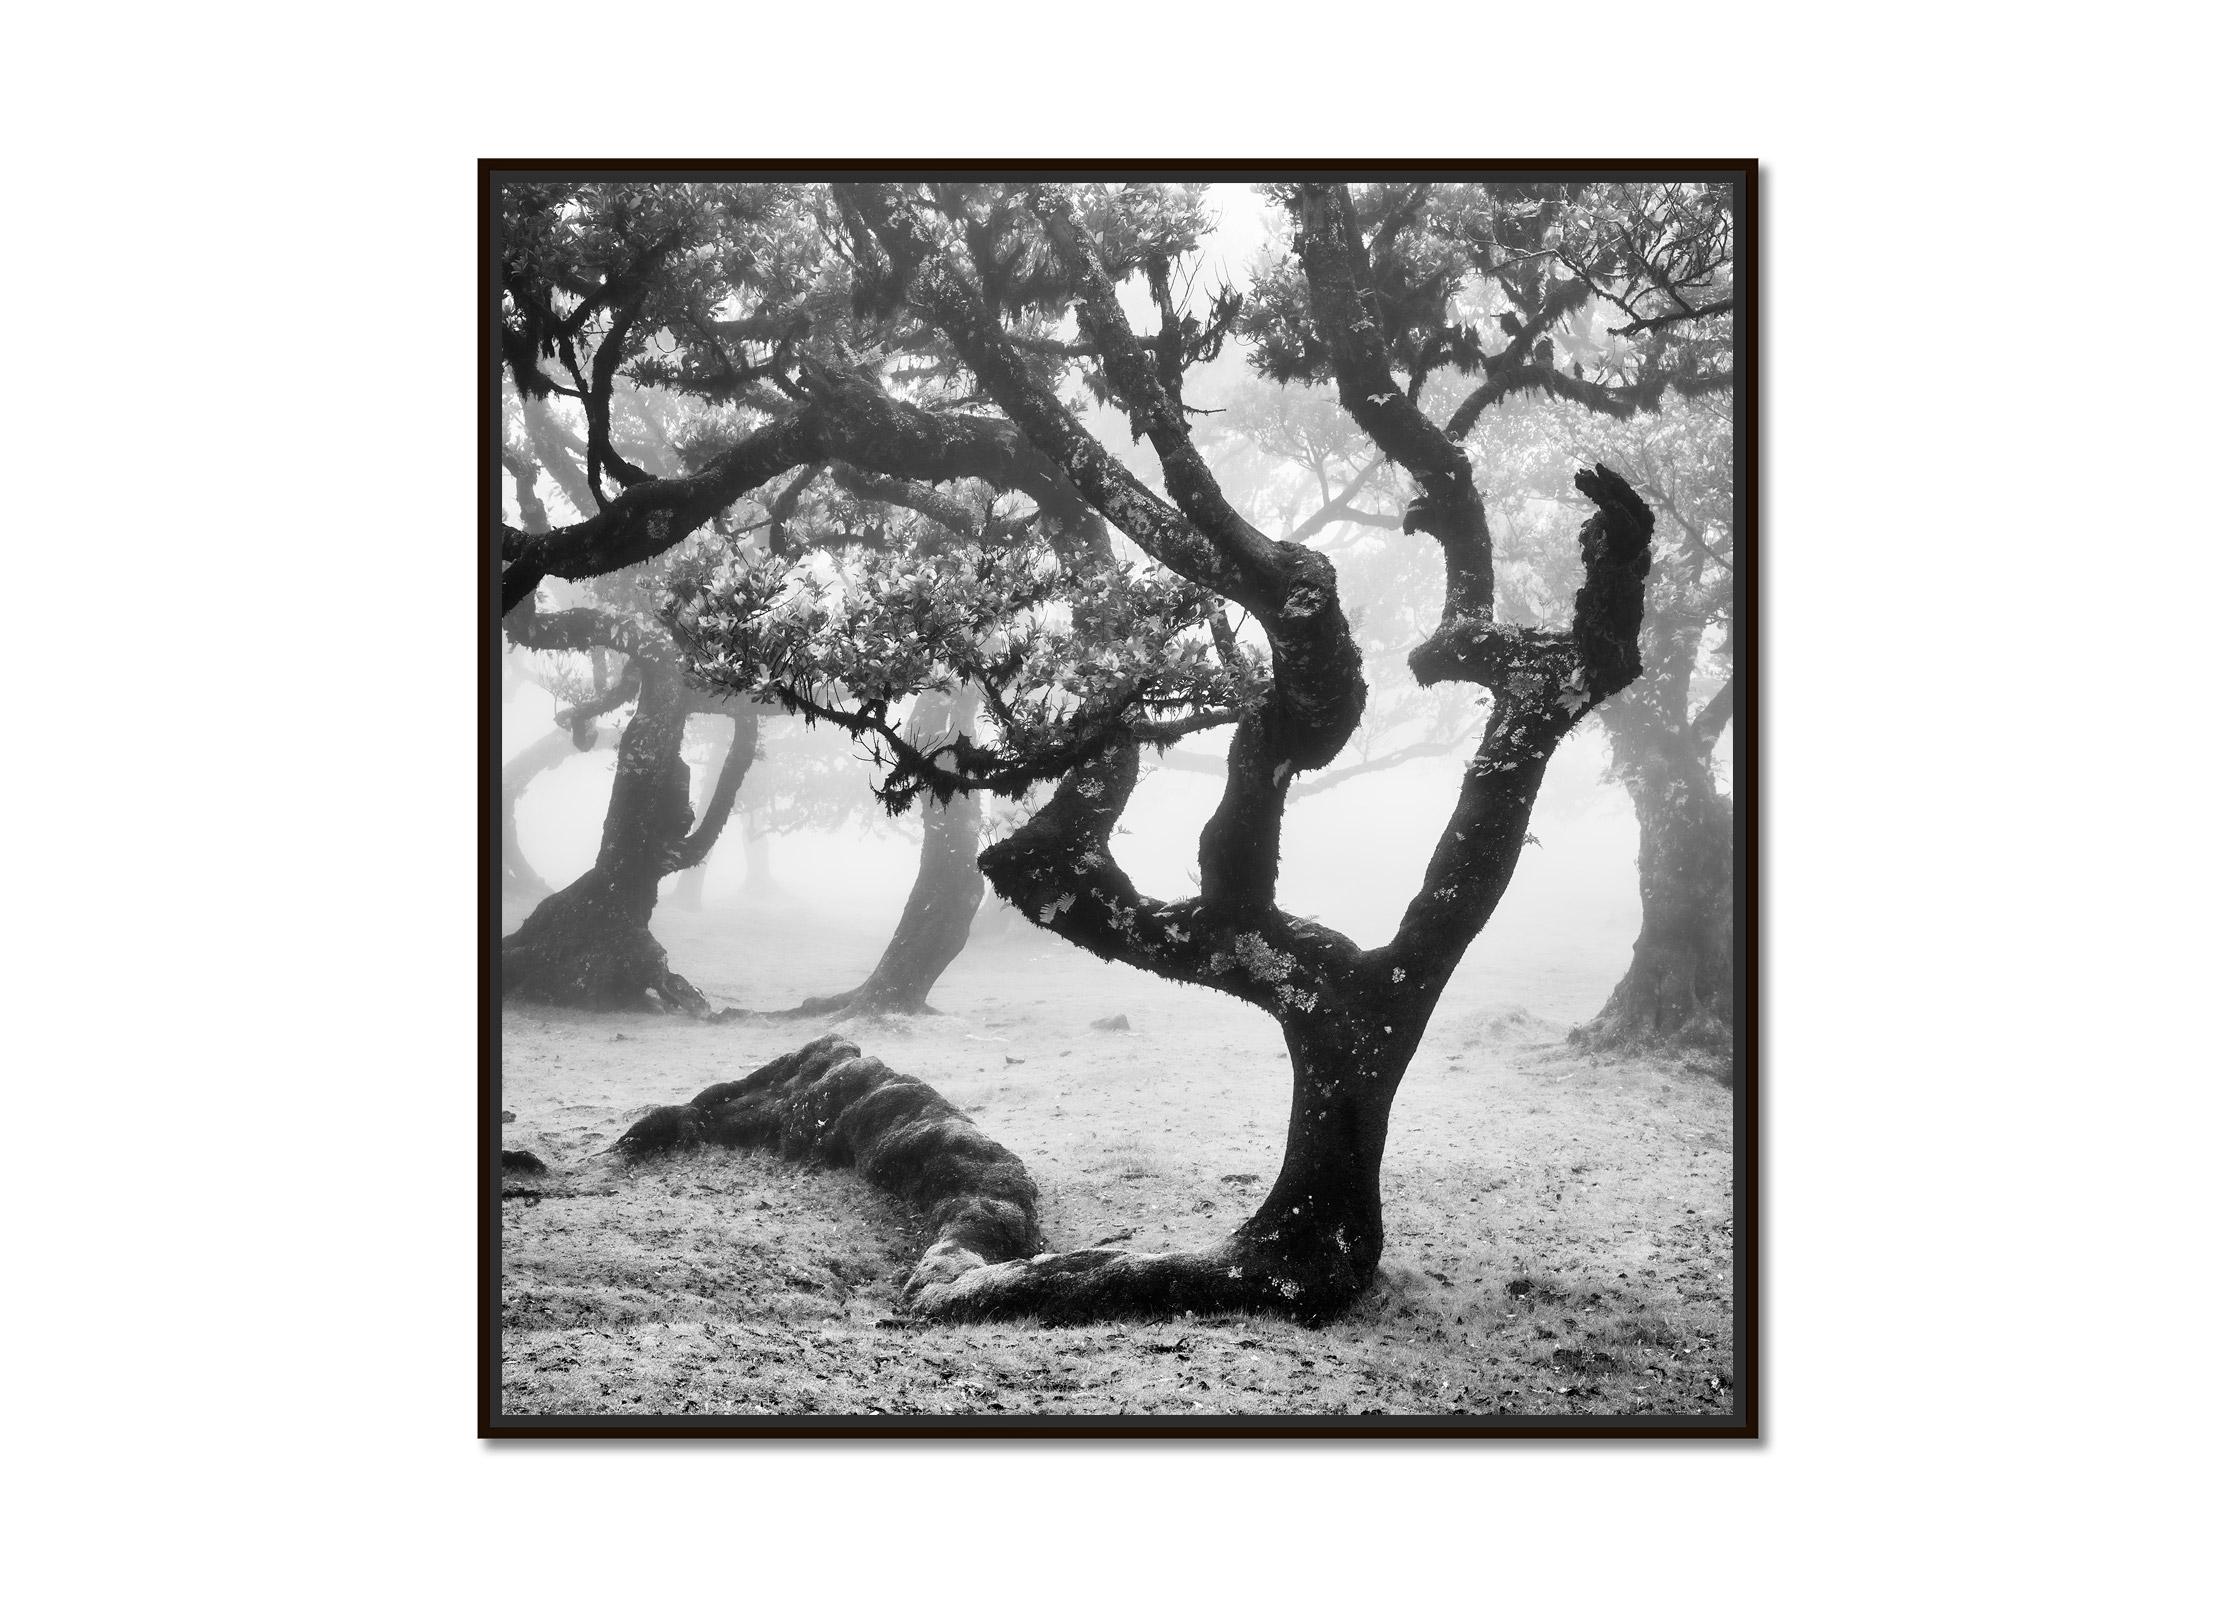 Ancient Laurisilva Forest, curved tree, misty, limited edition fine art print - Photograph by Gerald Berghammer